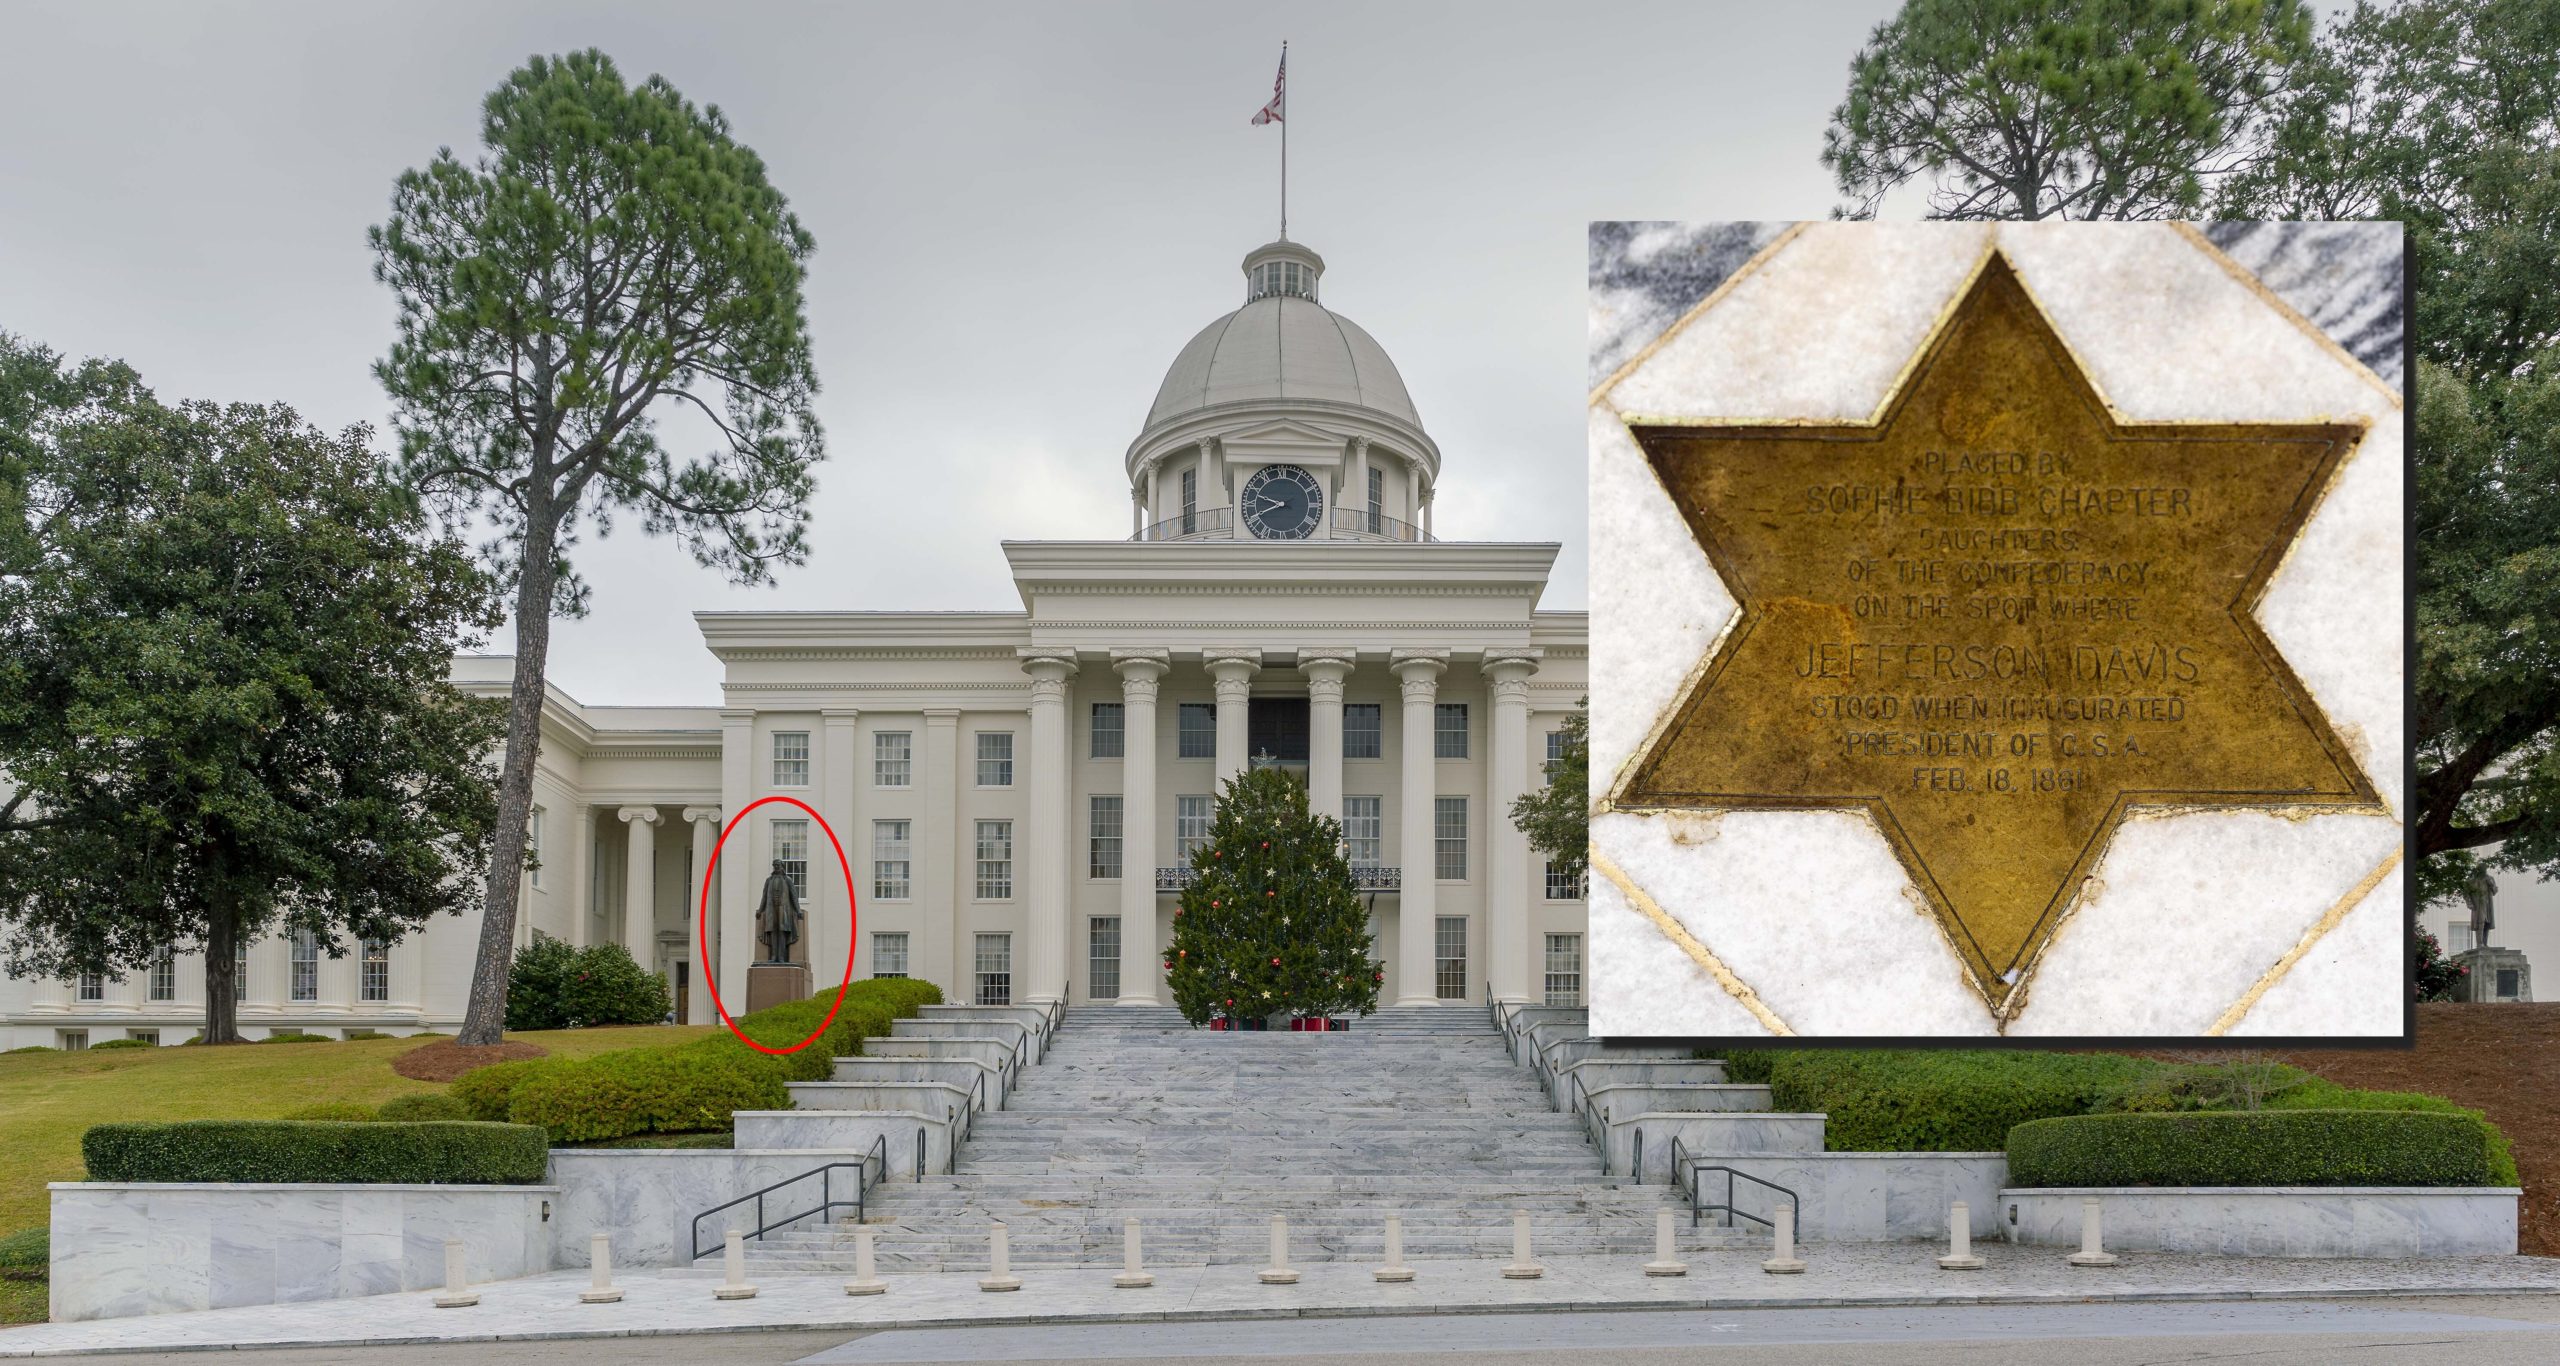 Alabama State Capitol Building photographed December 2021; statue at left noted in red: Frederick Cleveland Hibbard, Jefferson Davis, dedicated 1940; inset photo of star embedded in paving at the top of the steps where Davis stood during his inauguration as the President of the Confederacy (photos: Steven Zucker, CC BY-NC-SA 2.0)